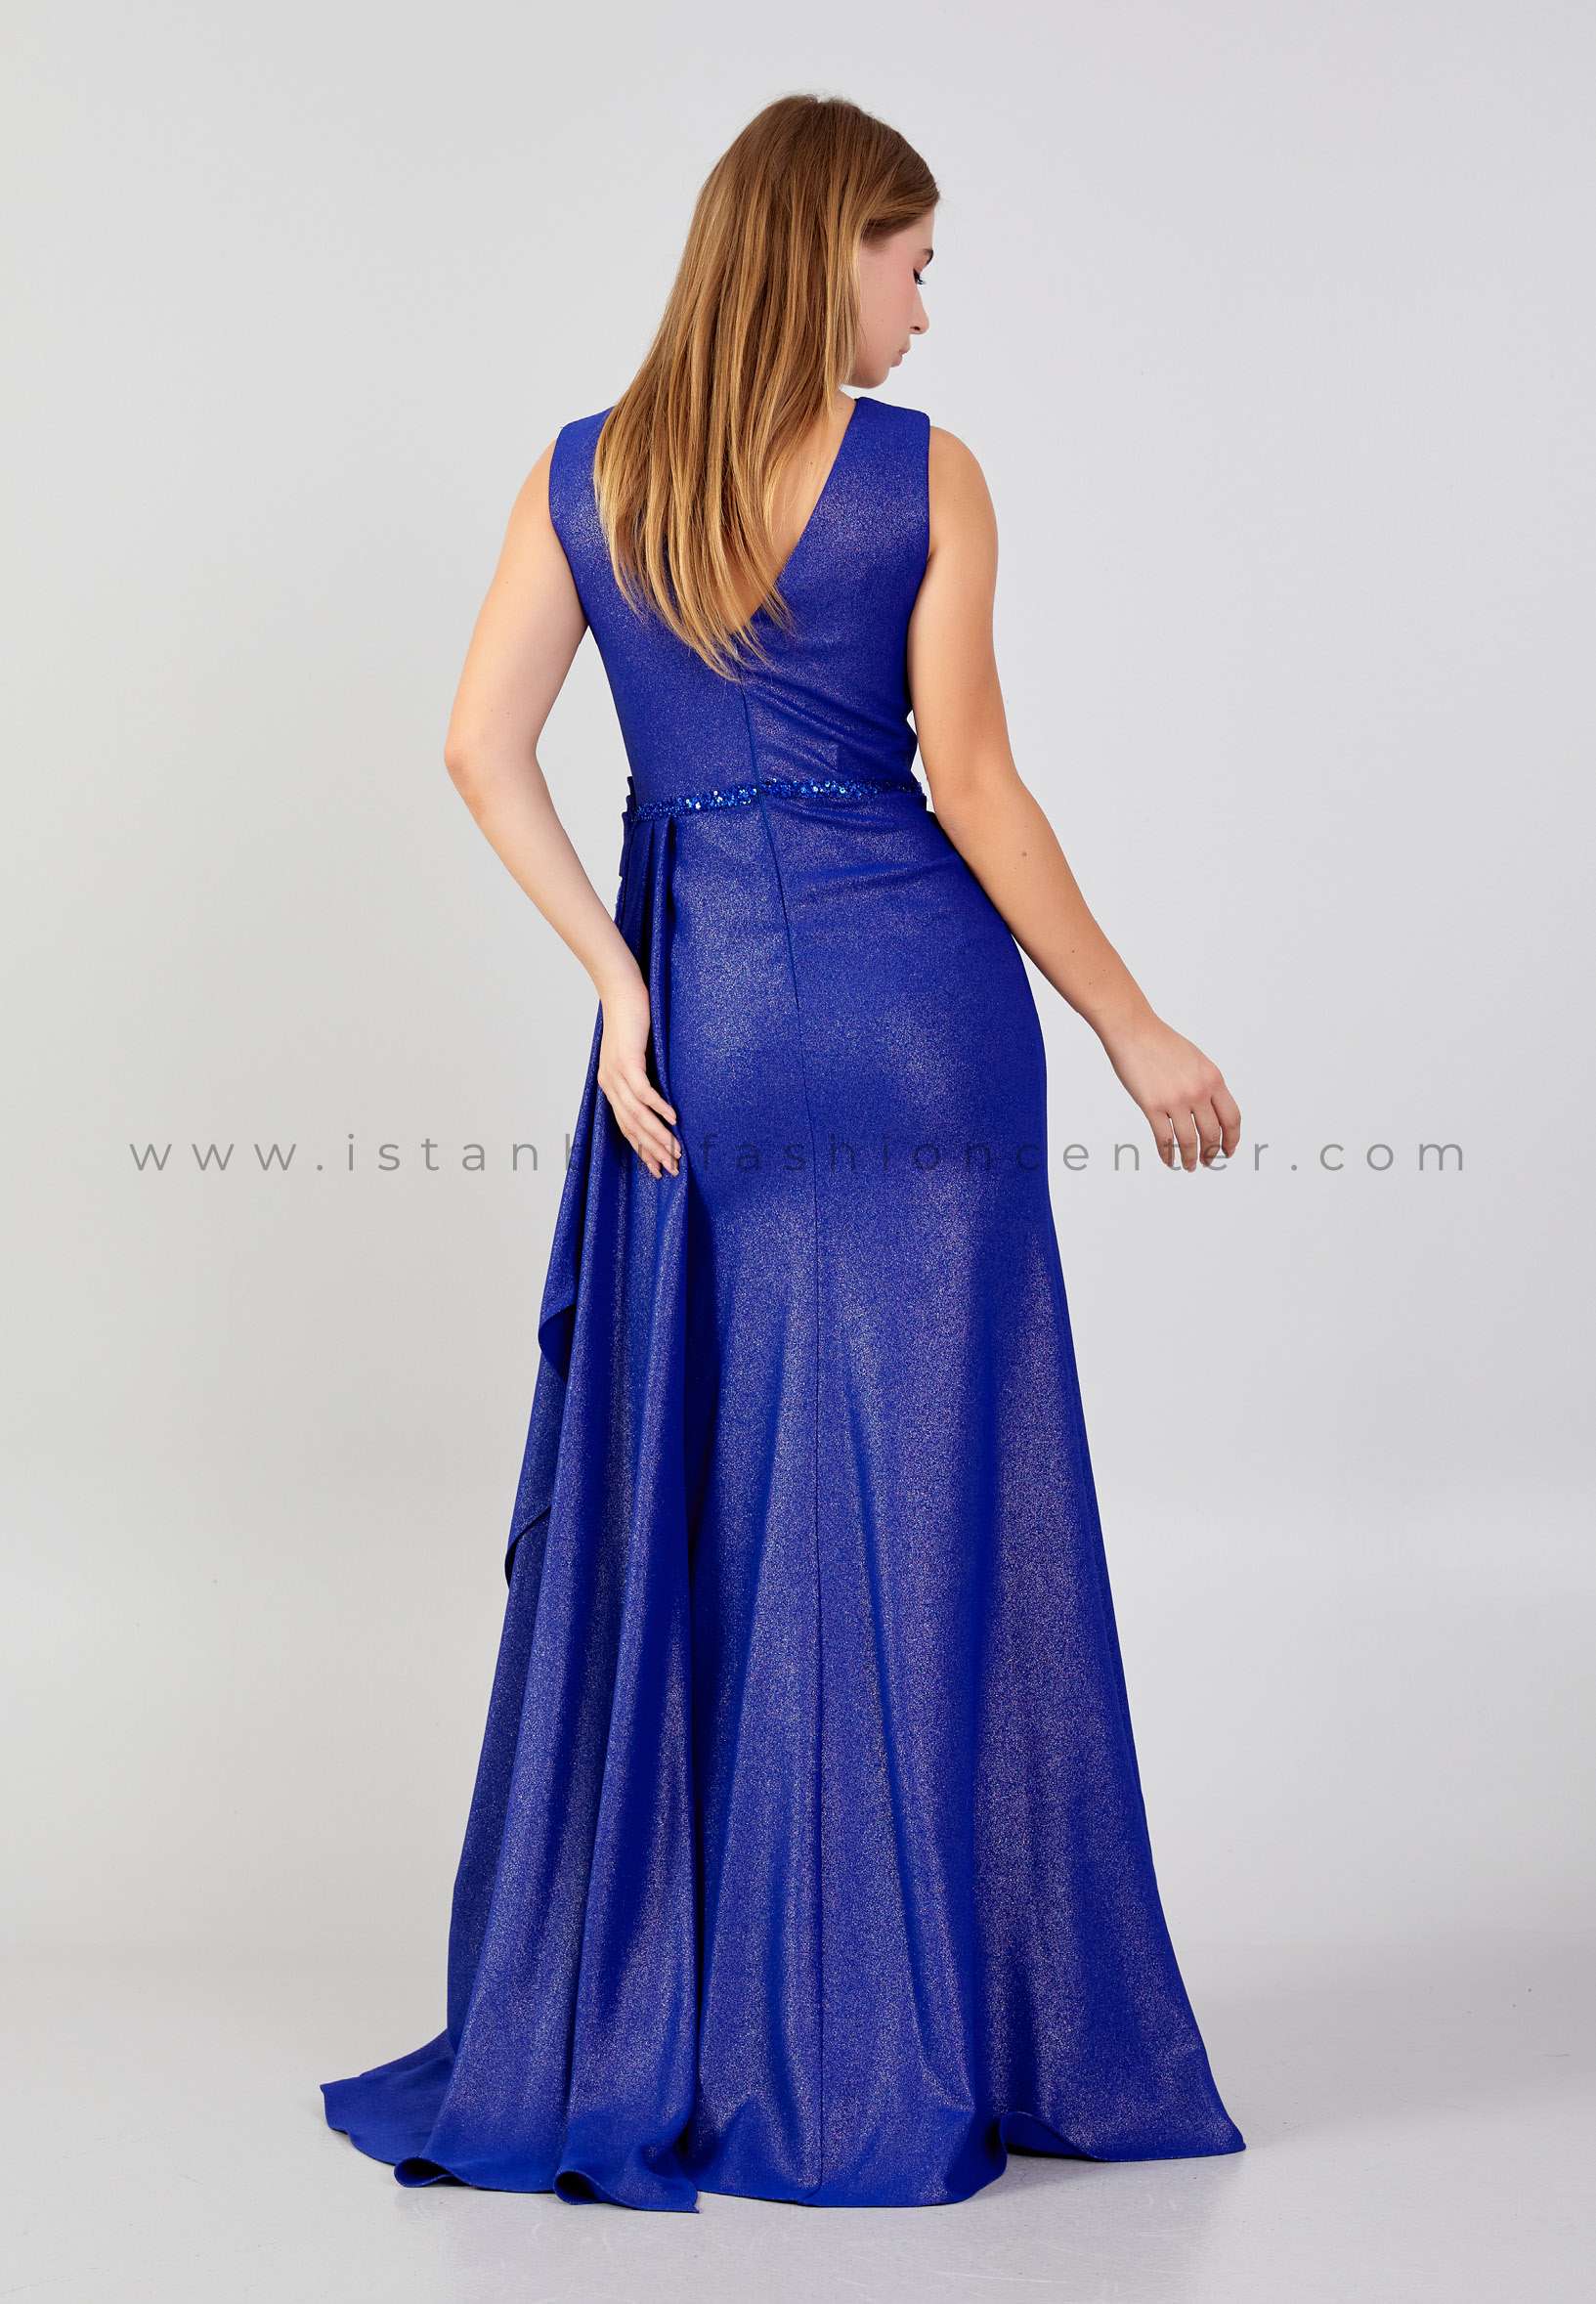 Royal Blue Plus Size Mermaid Prom Dresses Lace Appliques Nude Long Sleeves  Evening Gowns Satin Floor Length South African Formal Wear From  Sexypromdress, $133.67 | DHgate.Com